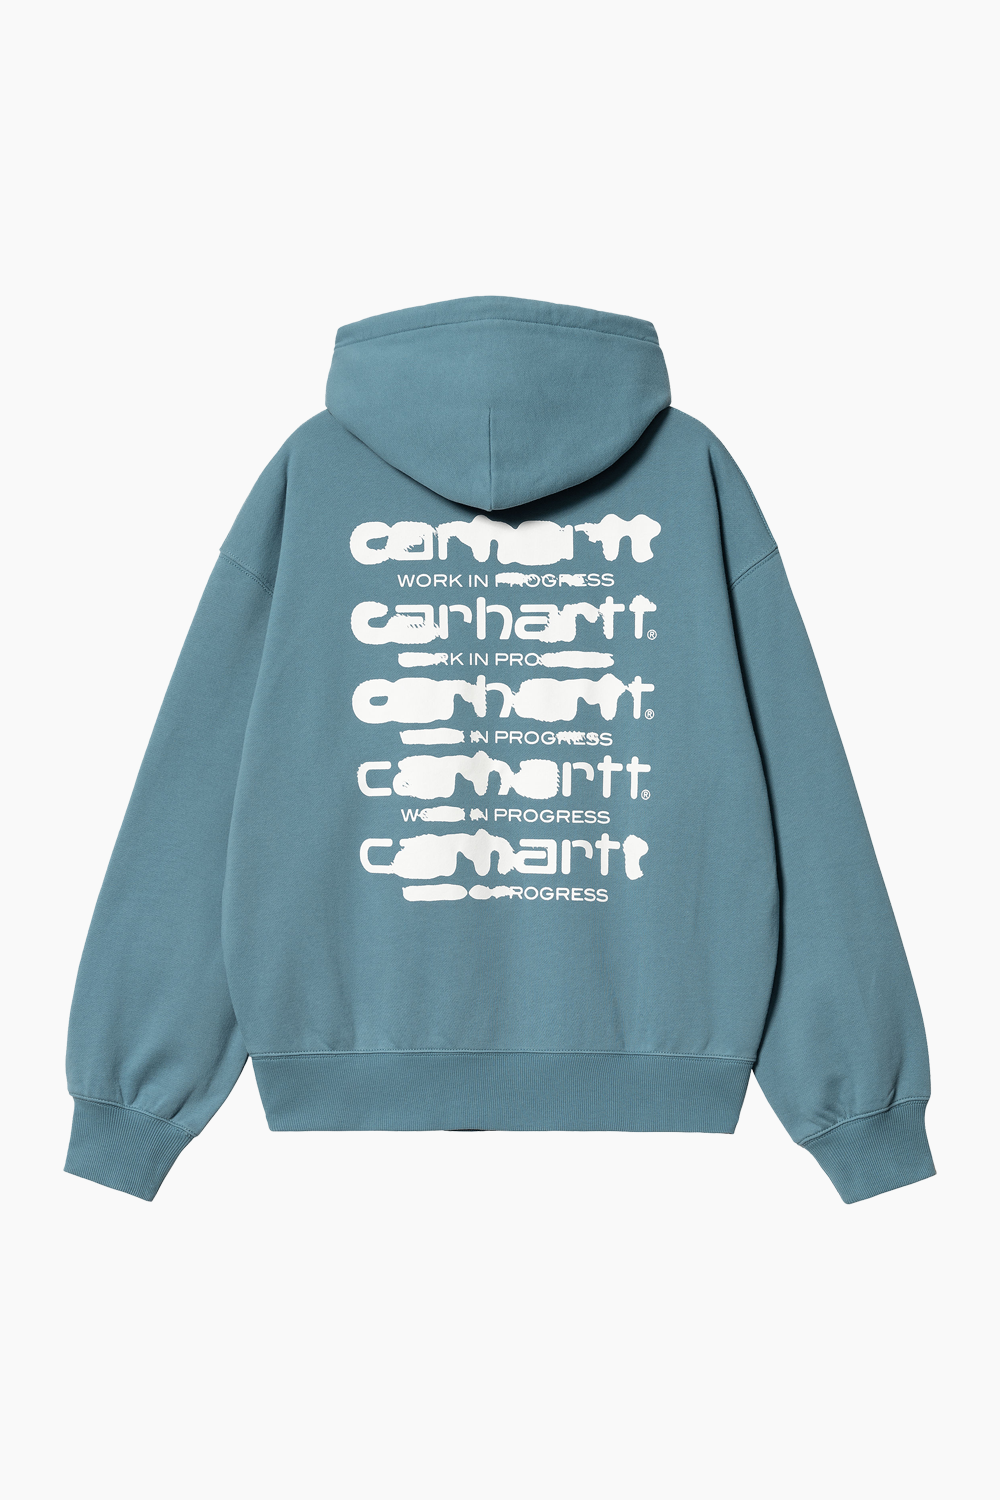 W' Hooded Ink Bleed Sweat - Vancouver Blue/White Stone Washed - Carhartt WIP